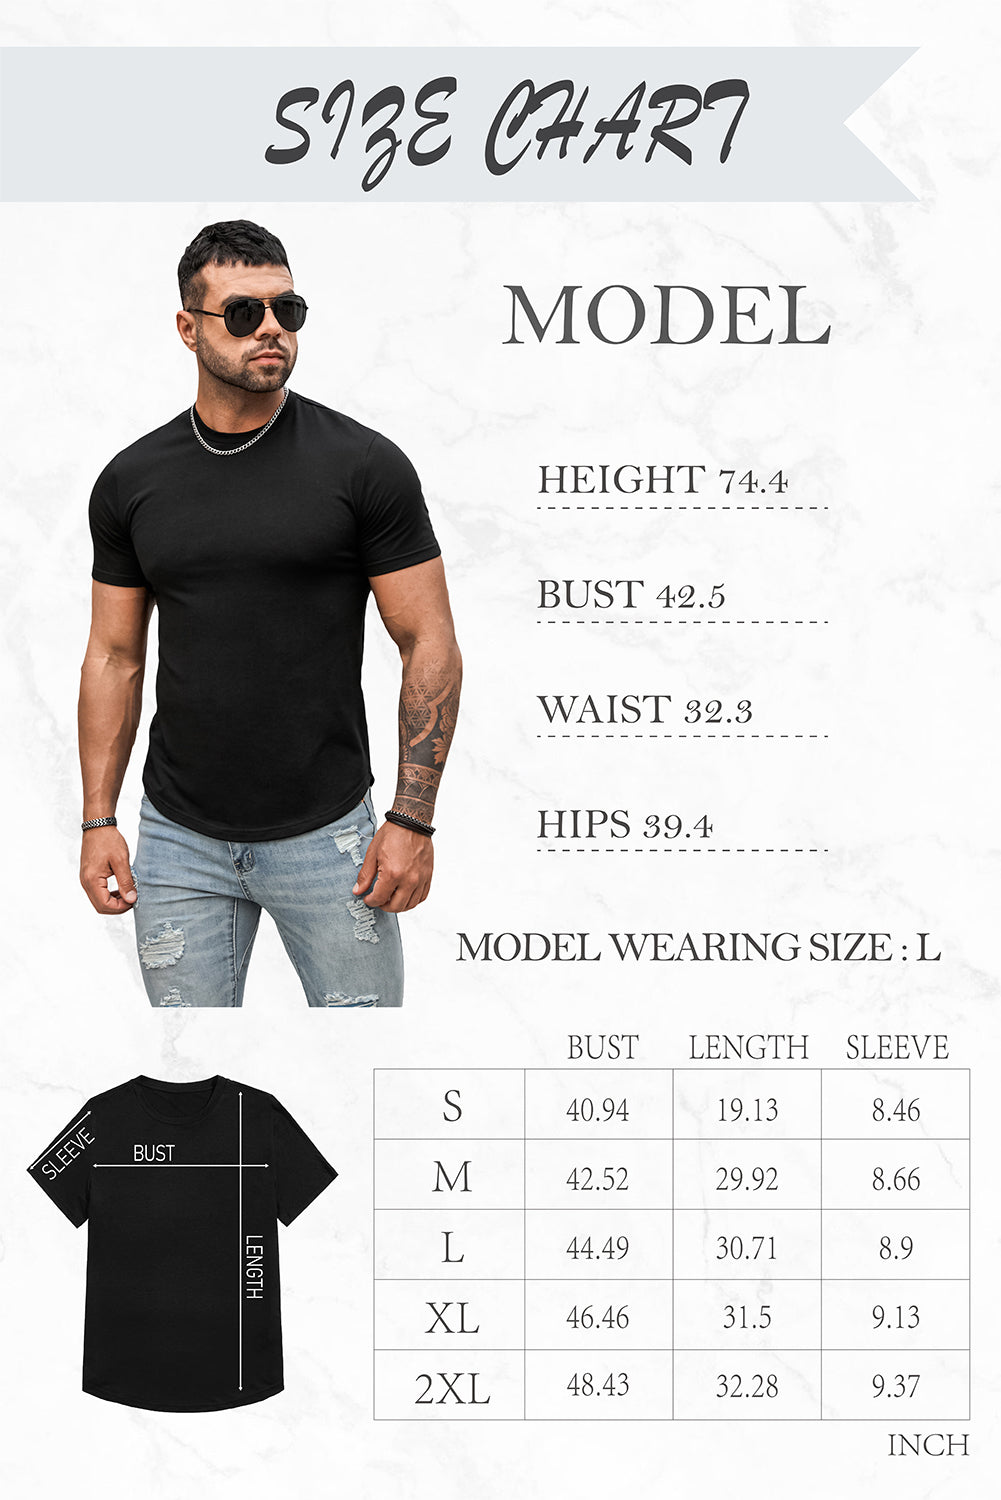 Black King Of The Grill Crown Print Muscle Fit Men's T Shirt Men's Tops JT's Designer Fashion